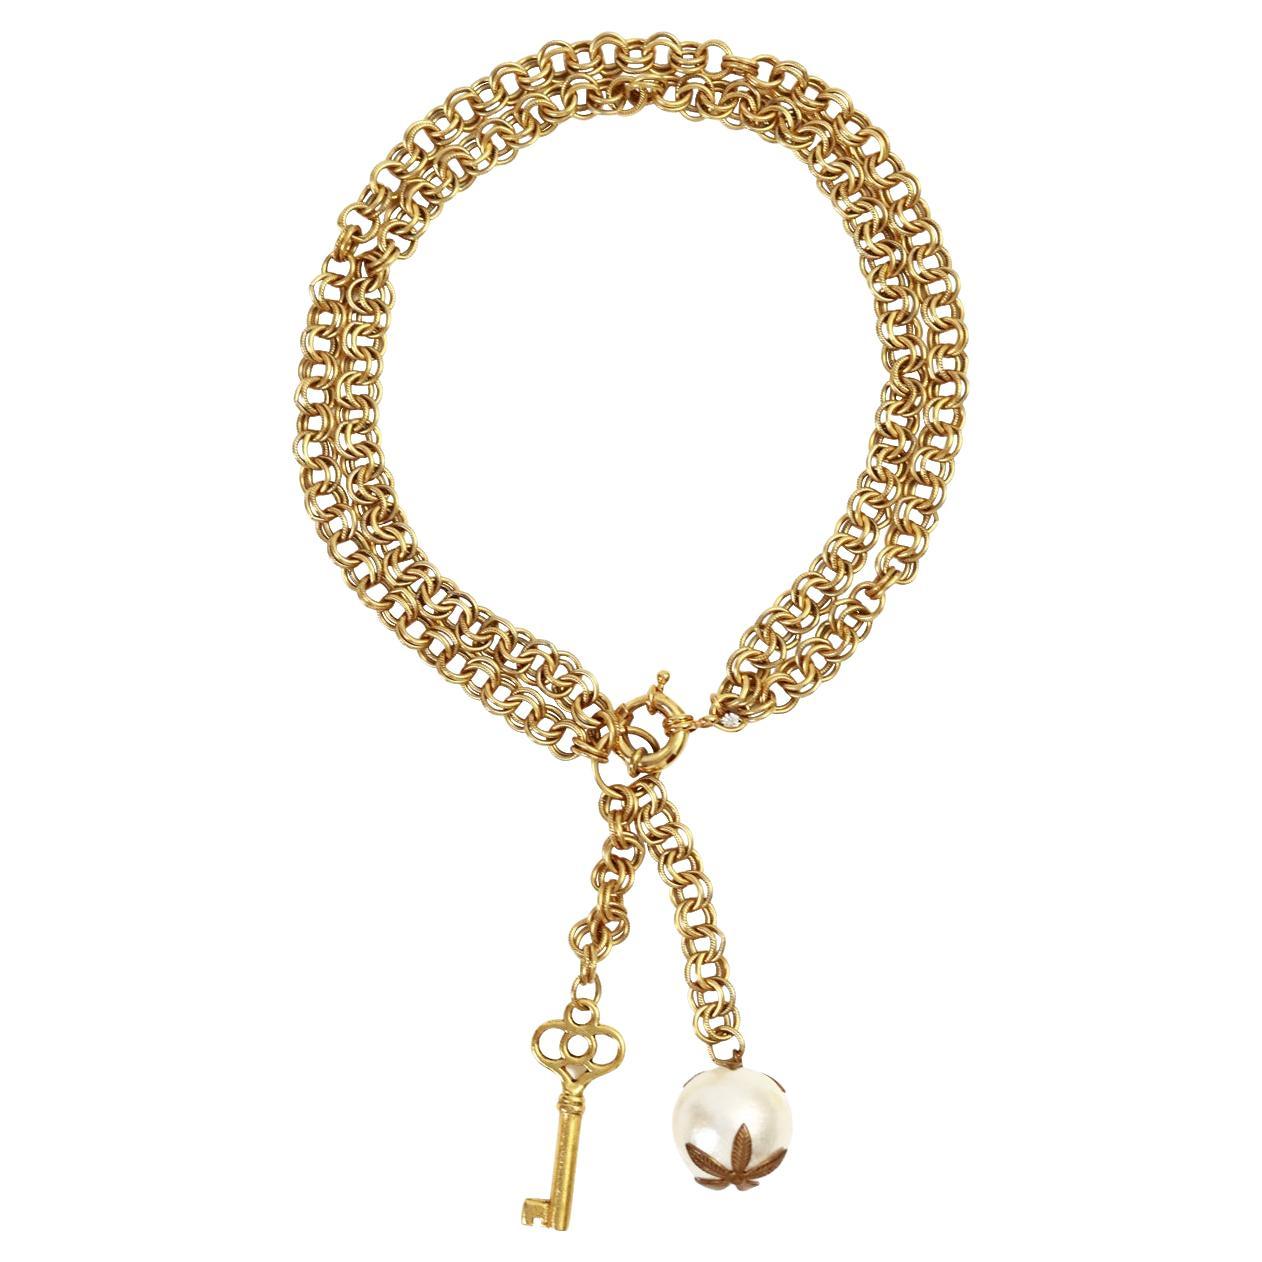 Vintage Gold Tone Lariat Drop Key and Faux Pearl Necklace Circa 1980's.  This is such a chic necklace and it is substantial and the double chain with the heavy pieces dangling down give it a very antique old world feel and it just looks like such a